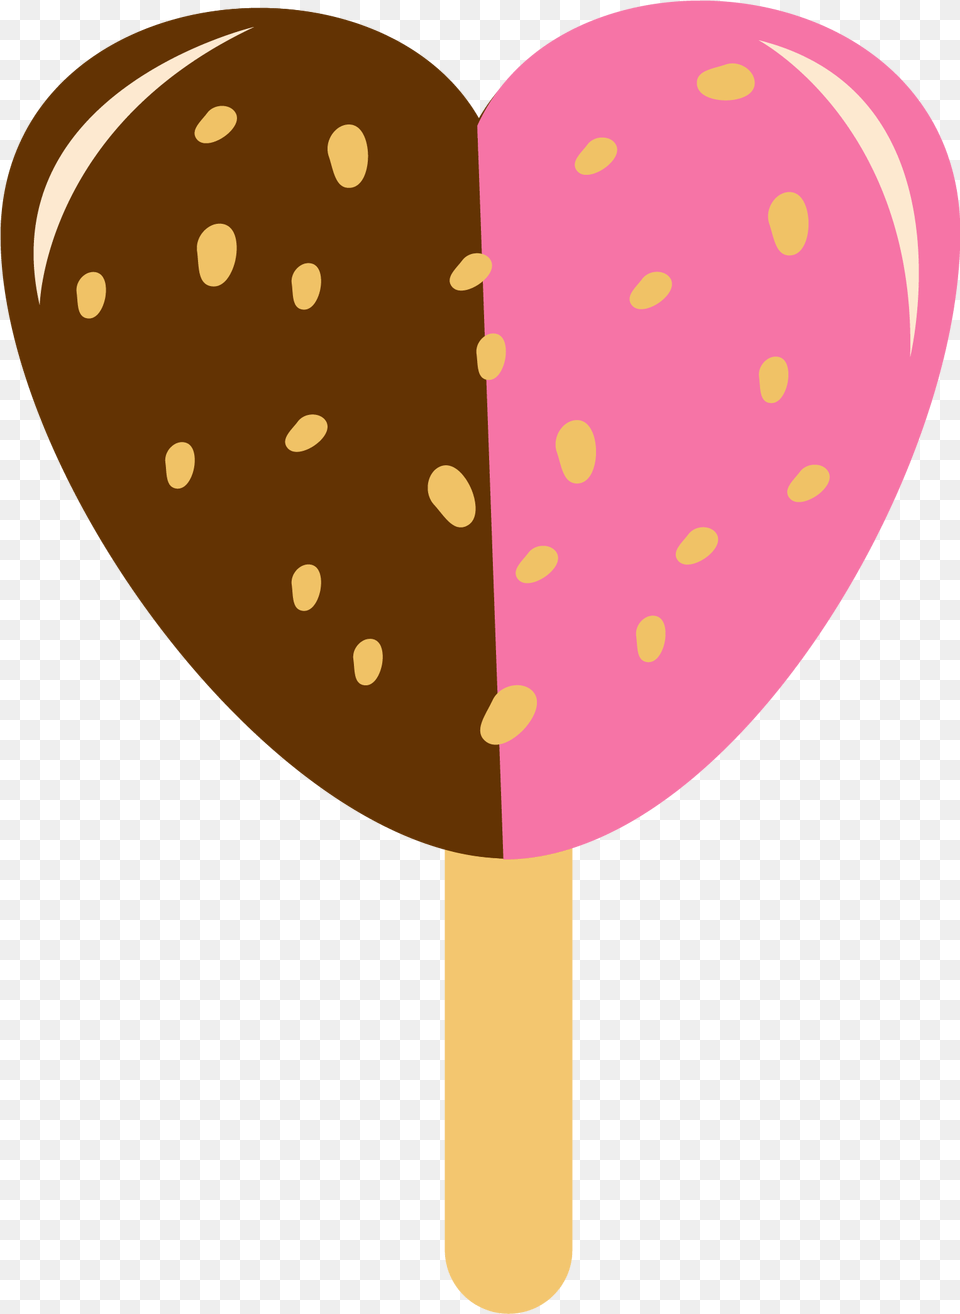 Photo By Daniellemoraesfalcao Ice Cream Heart Ice Cream Clip Art, Candy, Food, Sweets, Lollipop Free Png